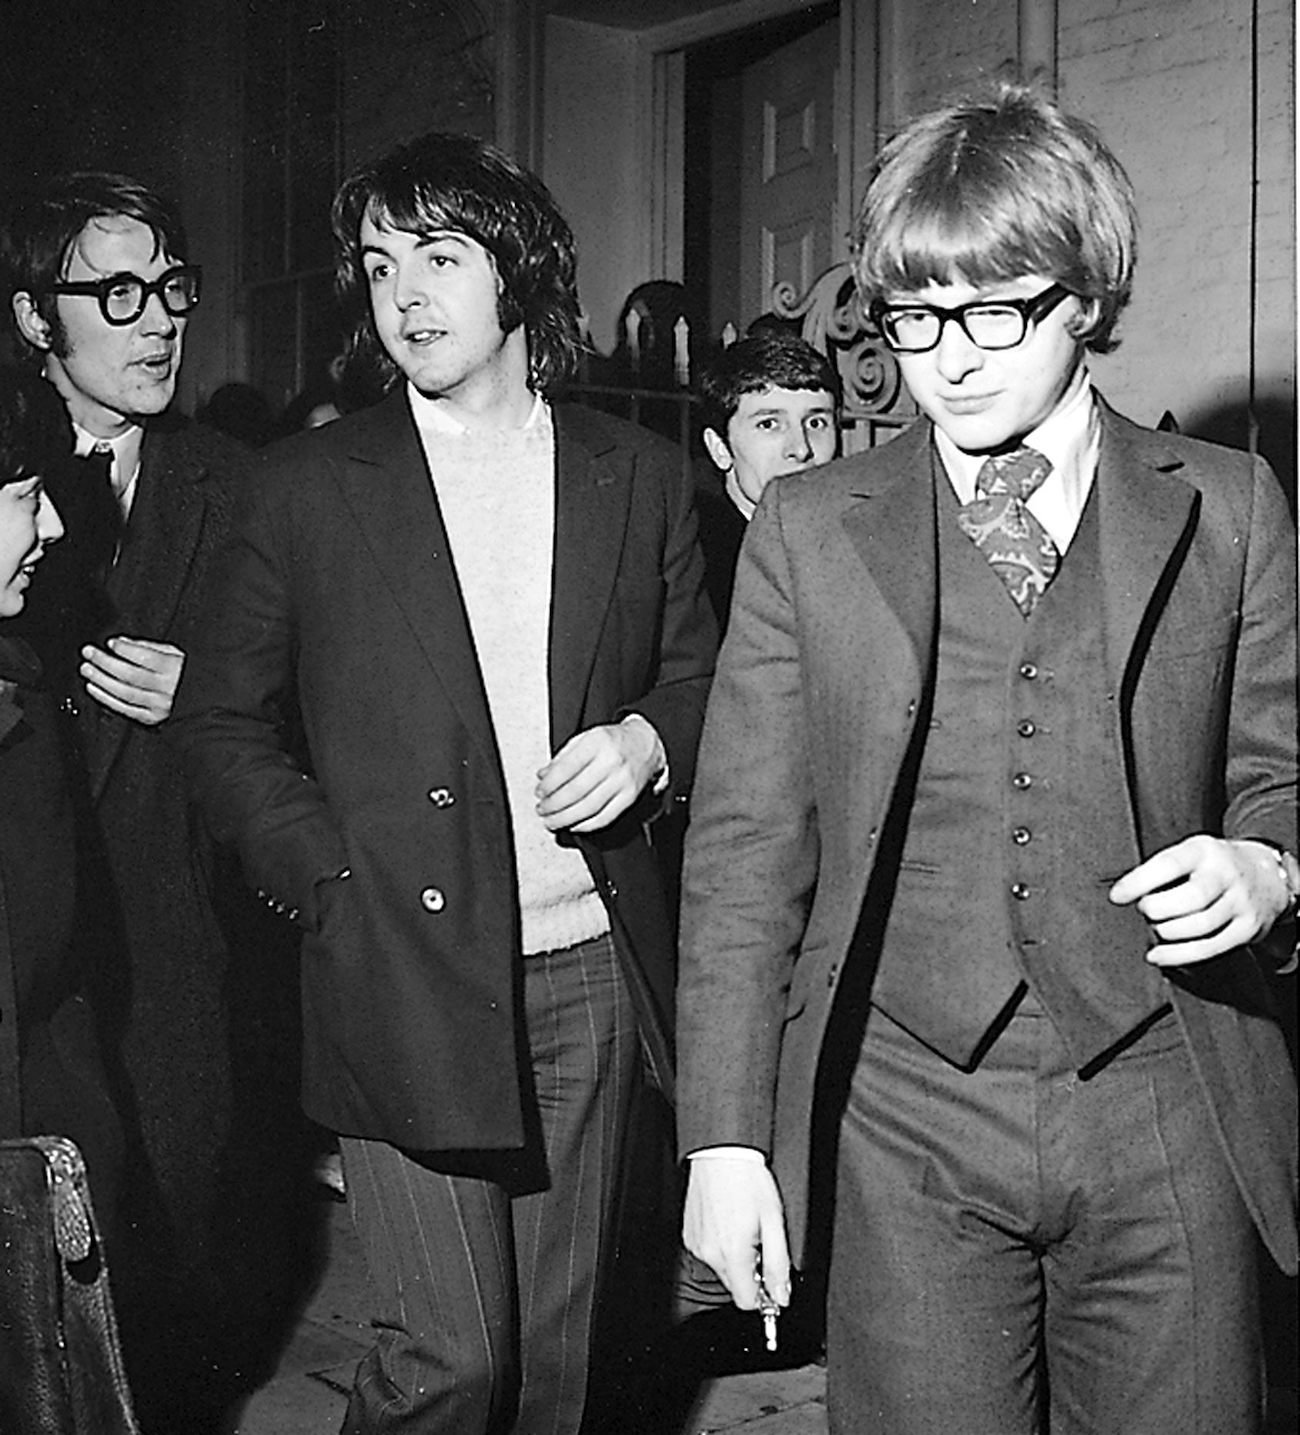 Paul McCartney and Peter Asher in suits in 1969.